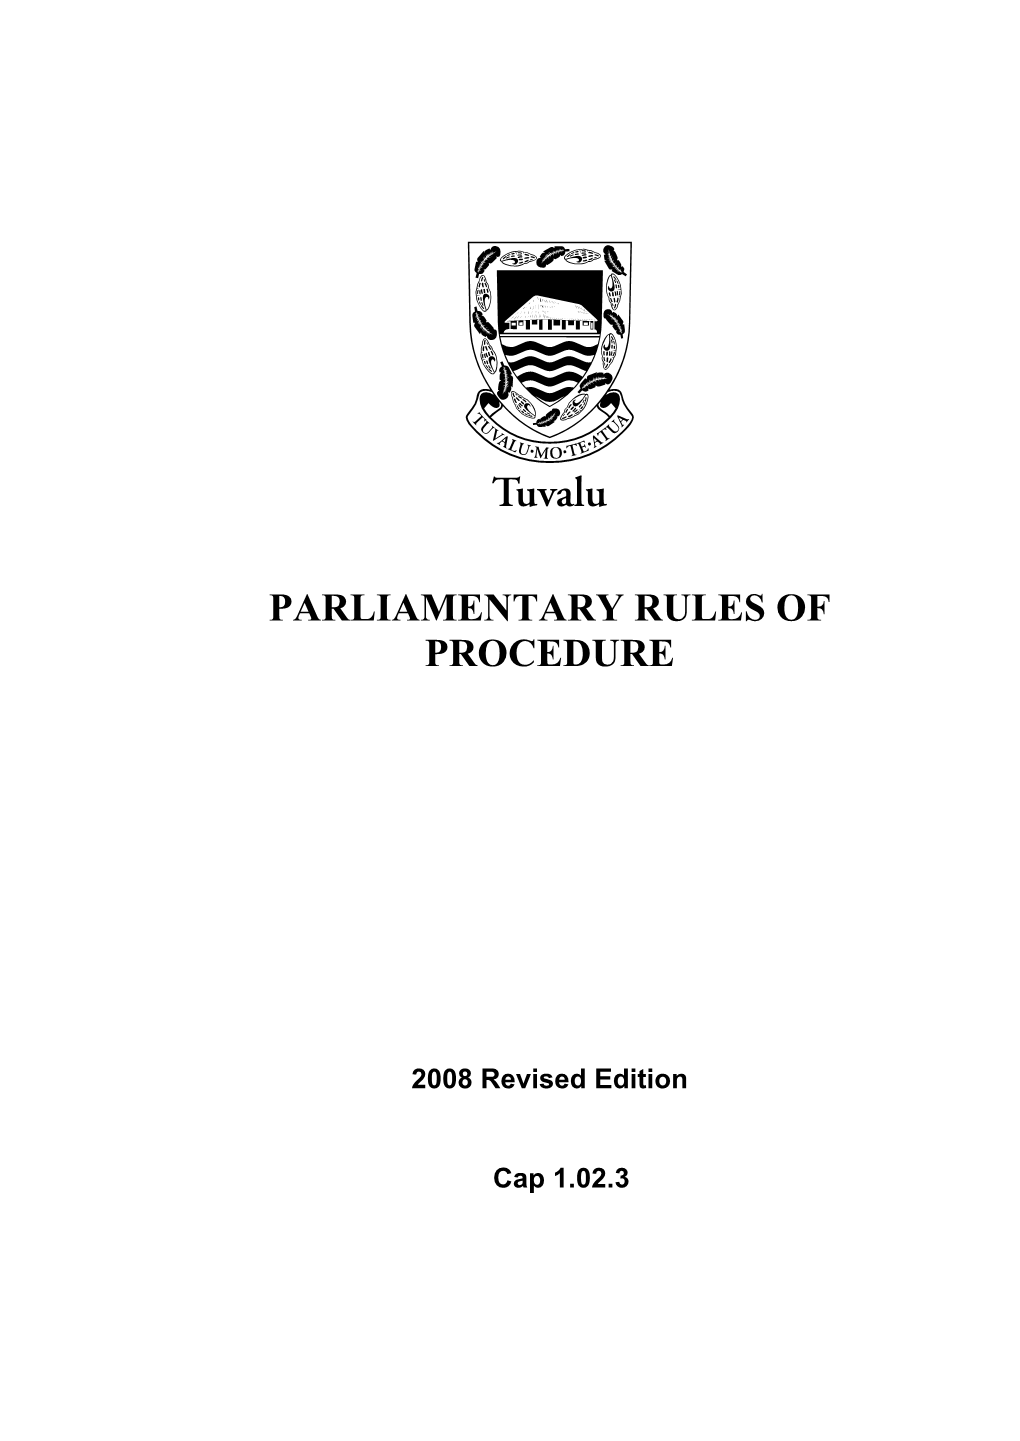 Parliamentary Rules of Procedure